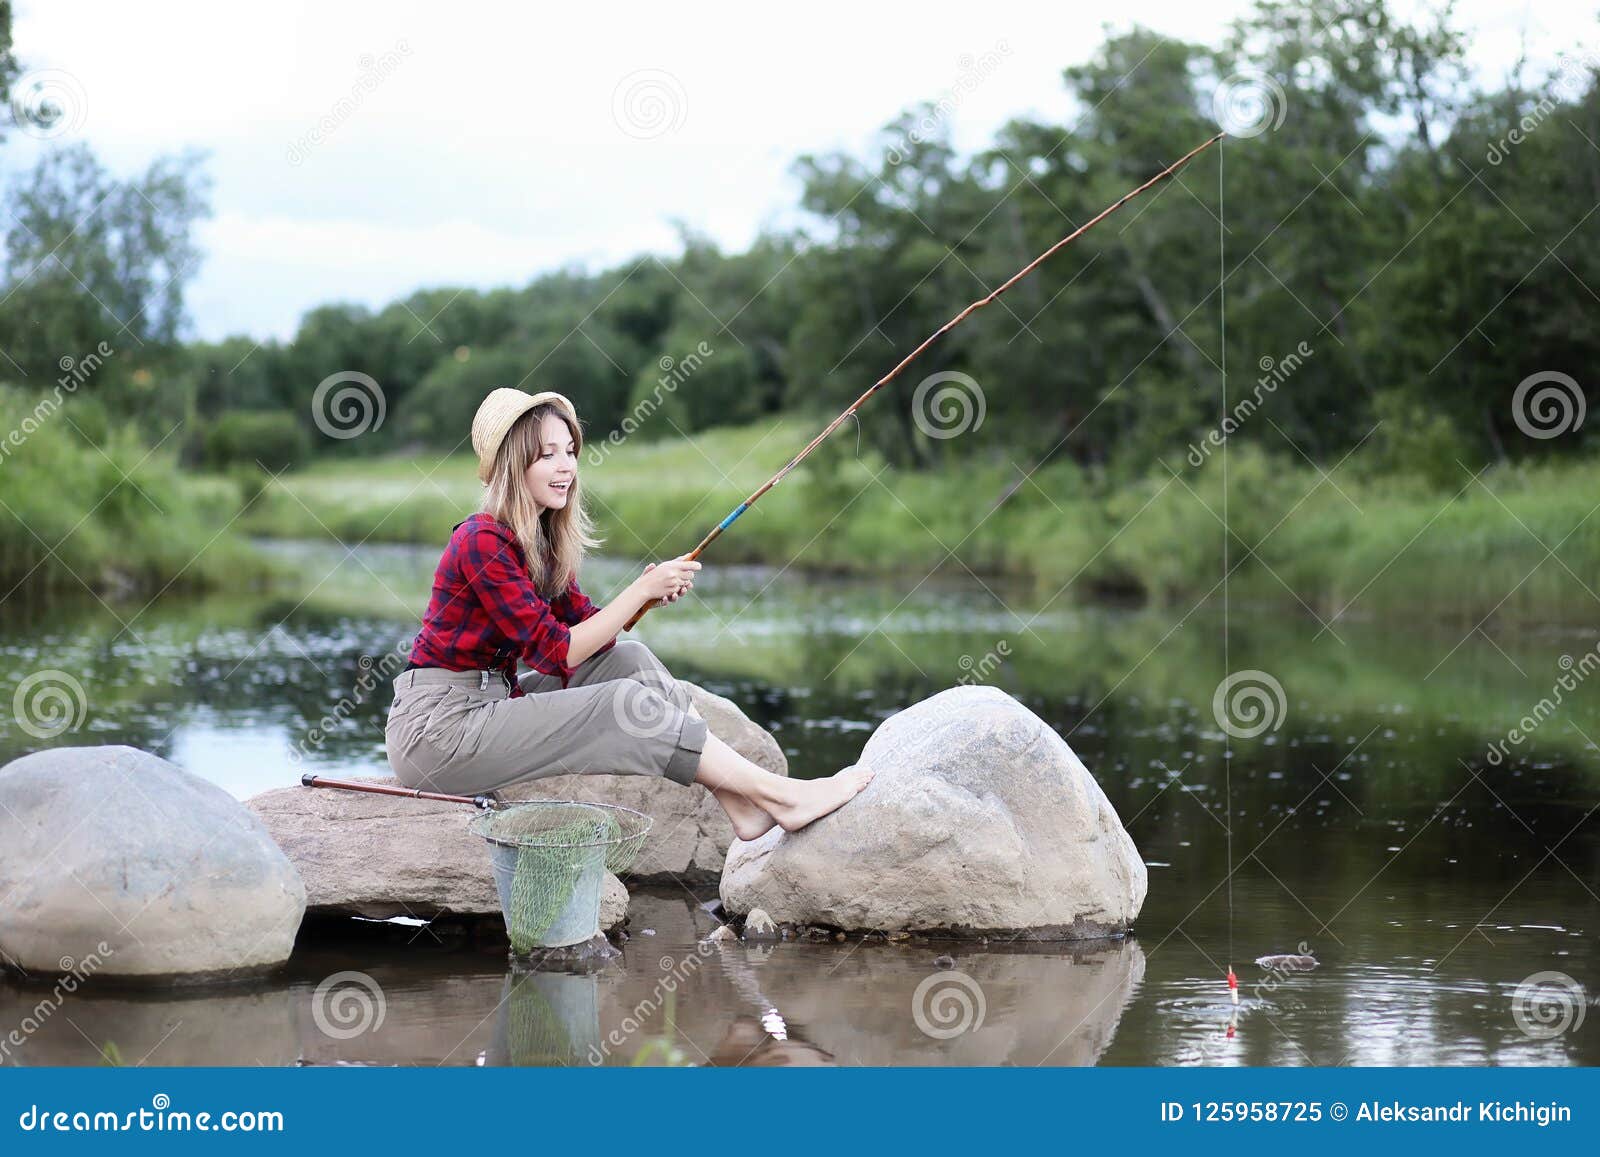 Girl by the River with a Fishing Rod Stock Image - Image of girl